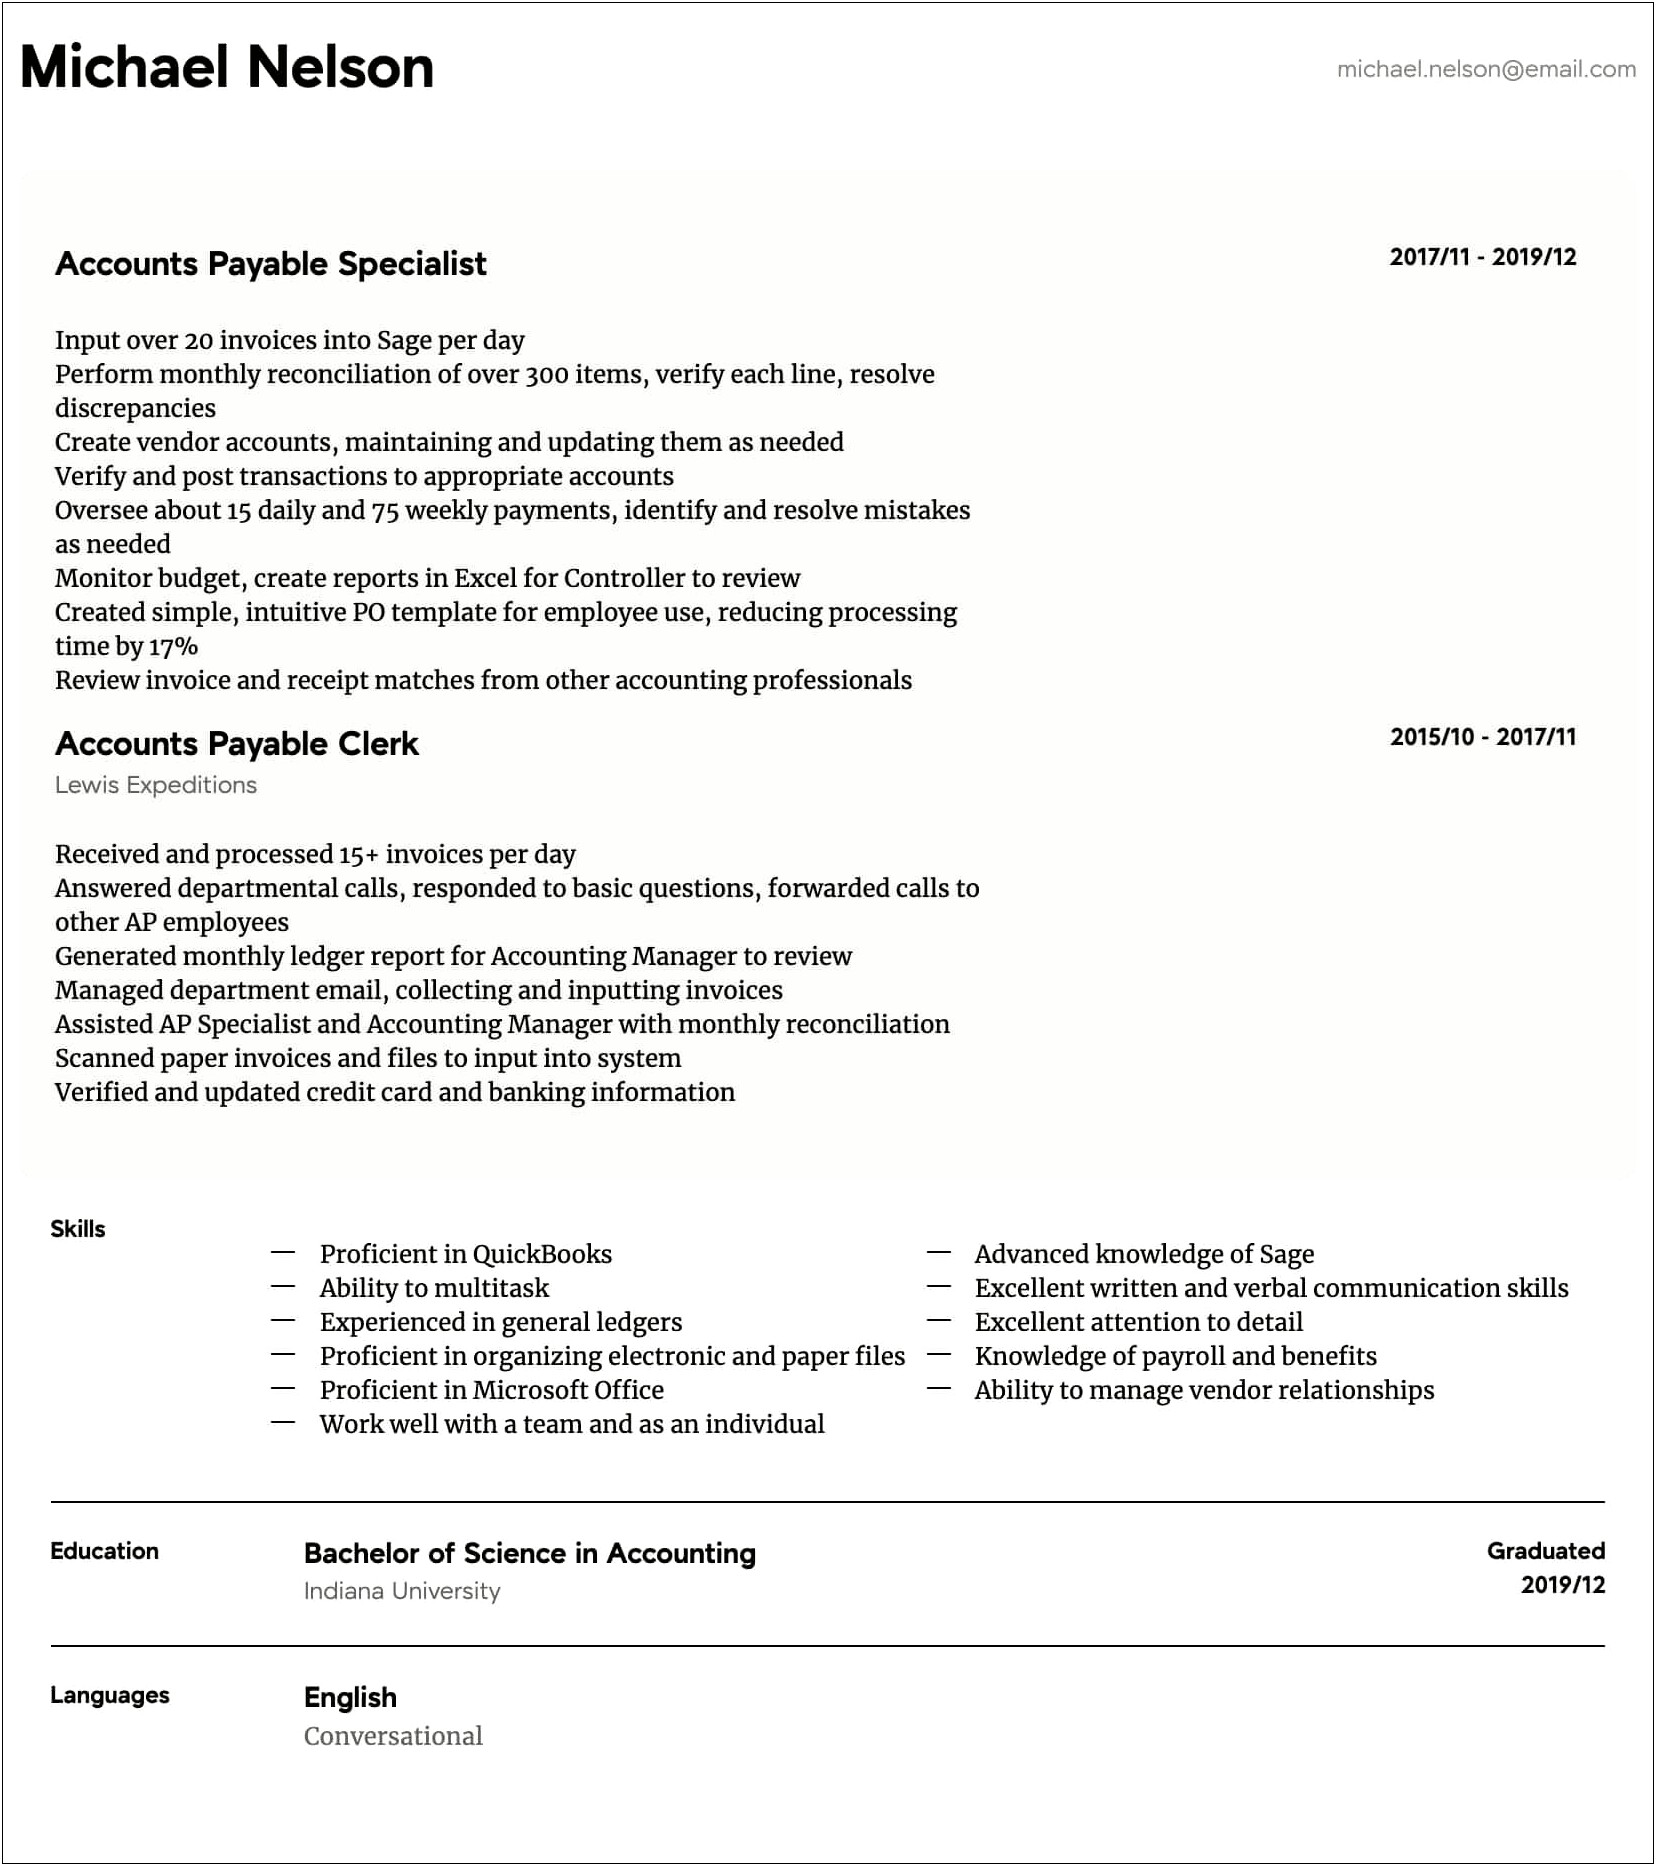 Resume Headline For Accounts Payable Manager